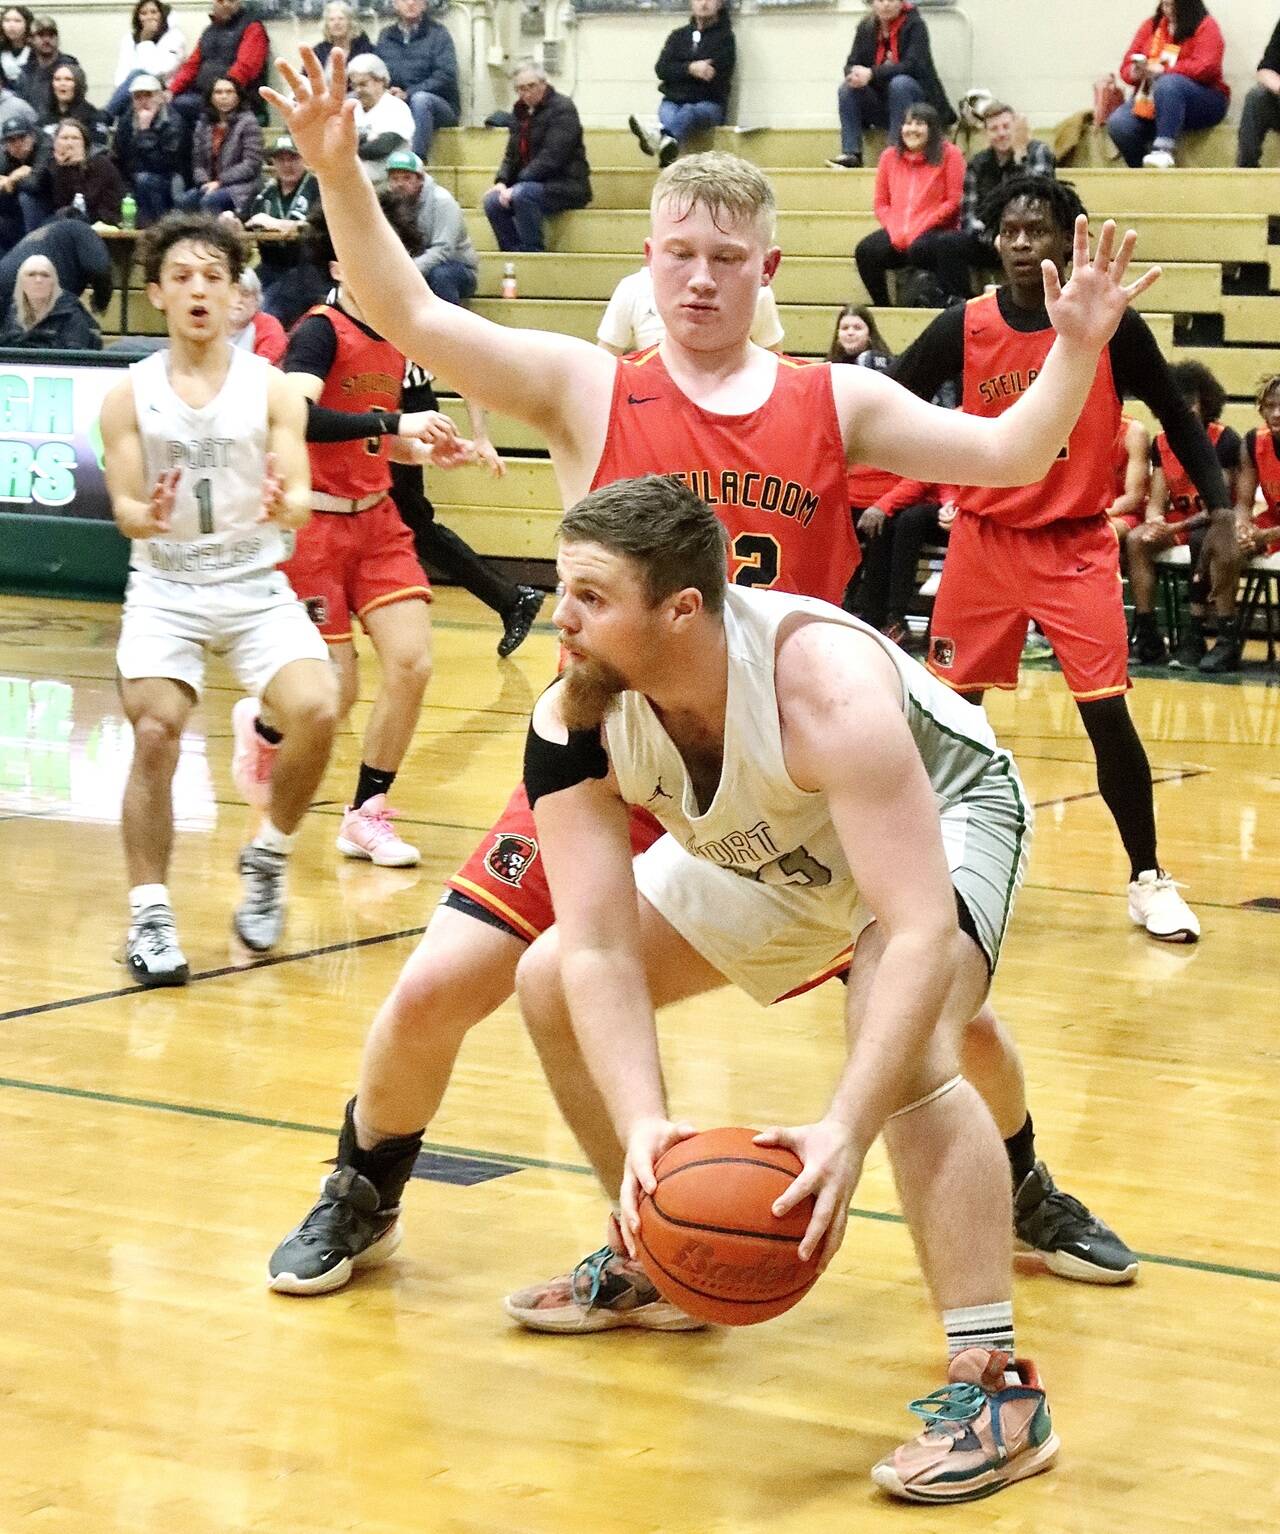 Port Angeles’ Ezra Townsend looks to pass against Steilacoom in Port Angeles on Thursday. The Roughriders finished the game on a 33-7 run to come from behind and win 63-49 to move on to a state-qualifying game Saturday against Enumclaw. (Dave Logan/for Peninsula Daily News)